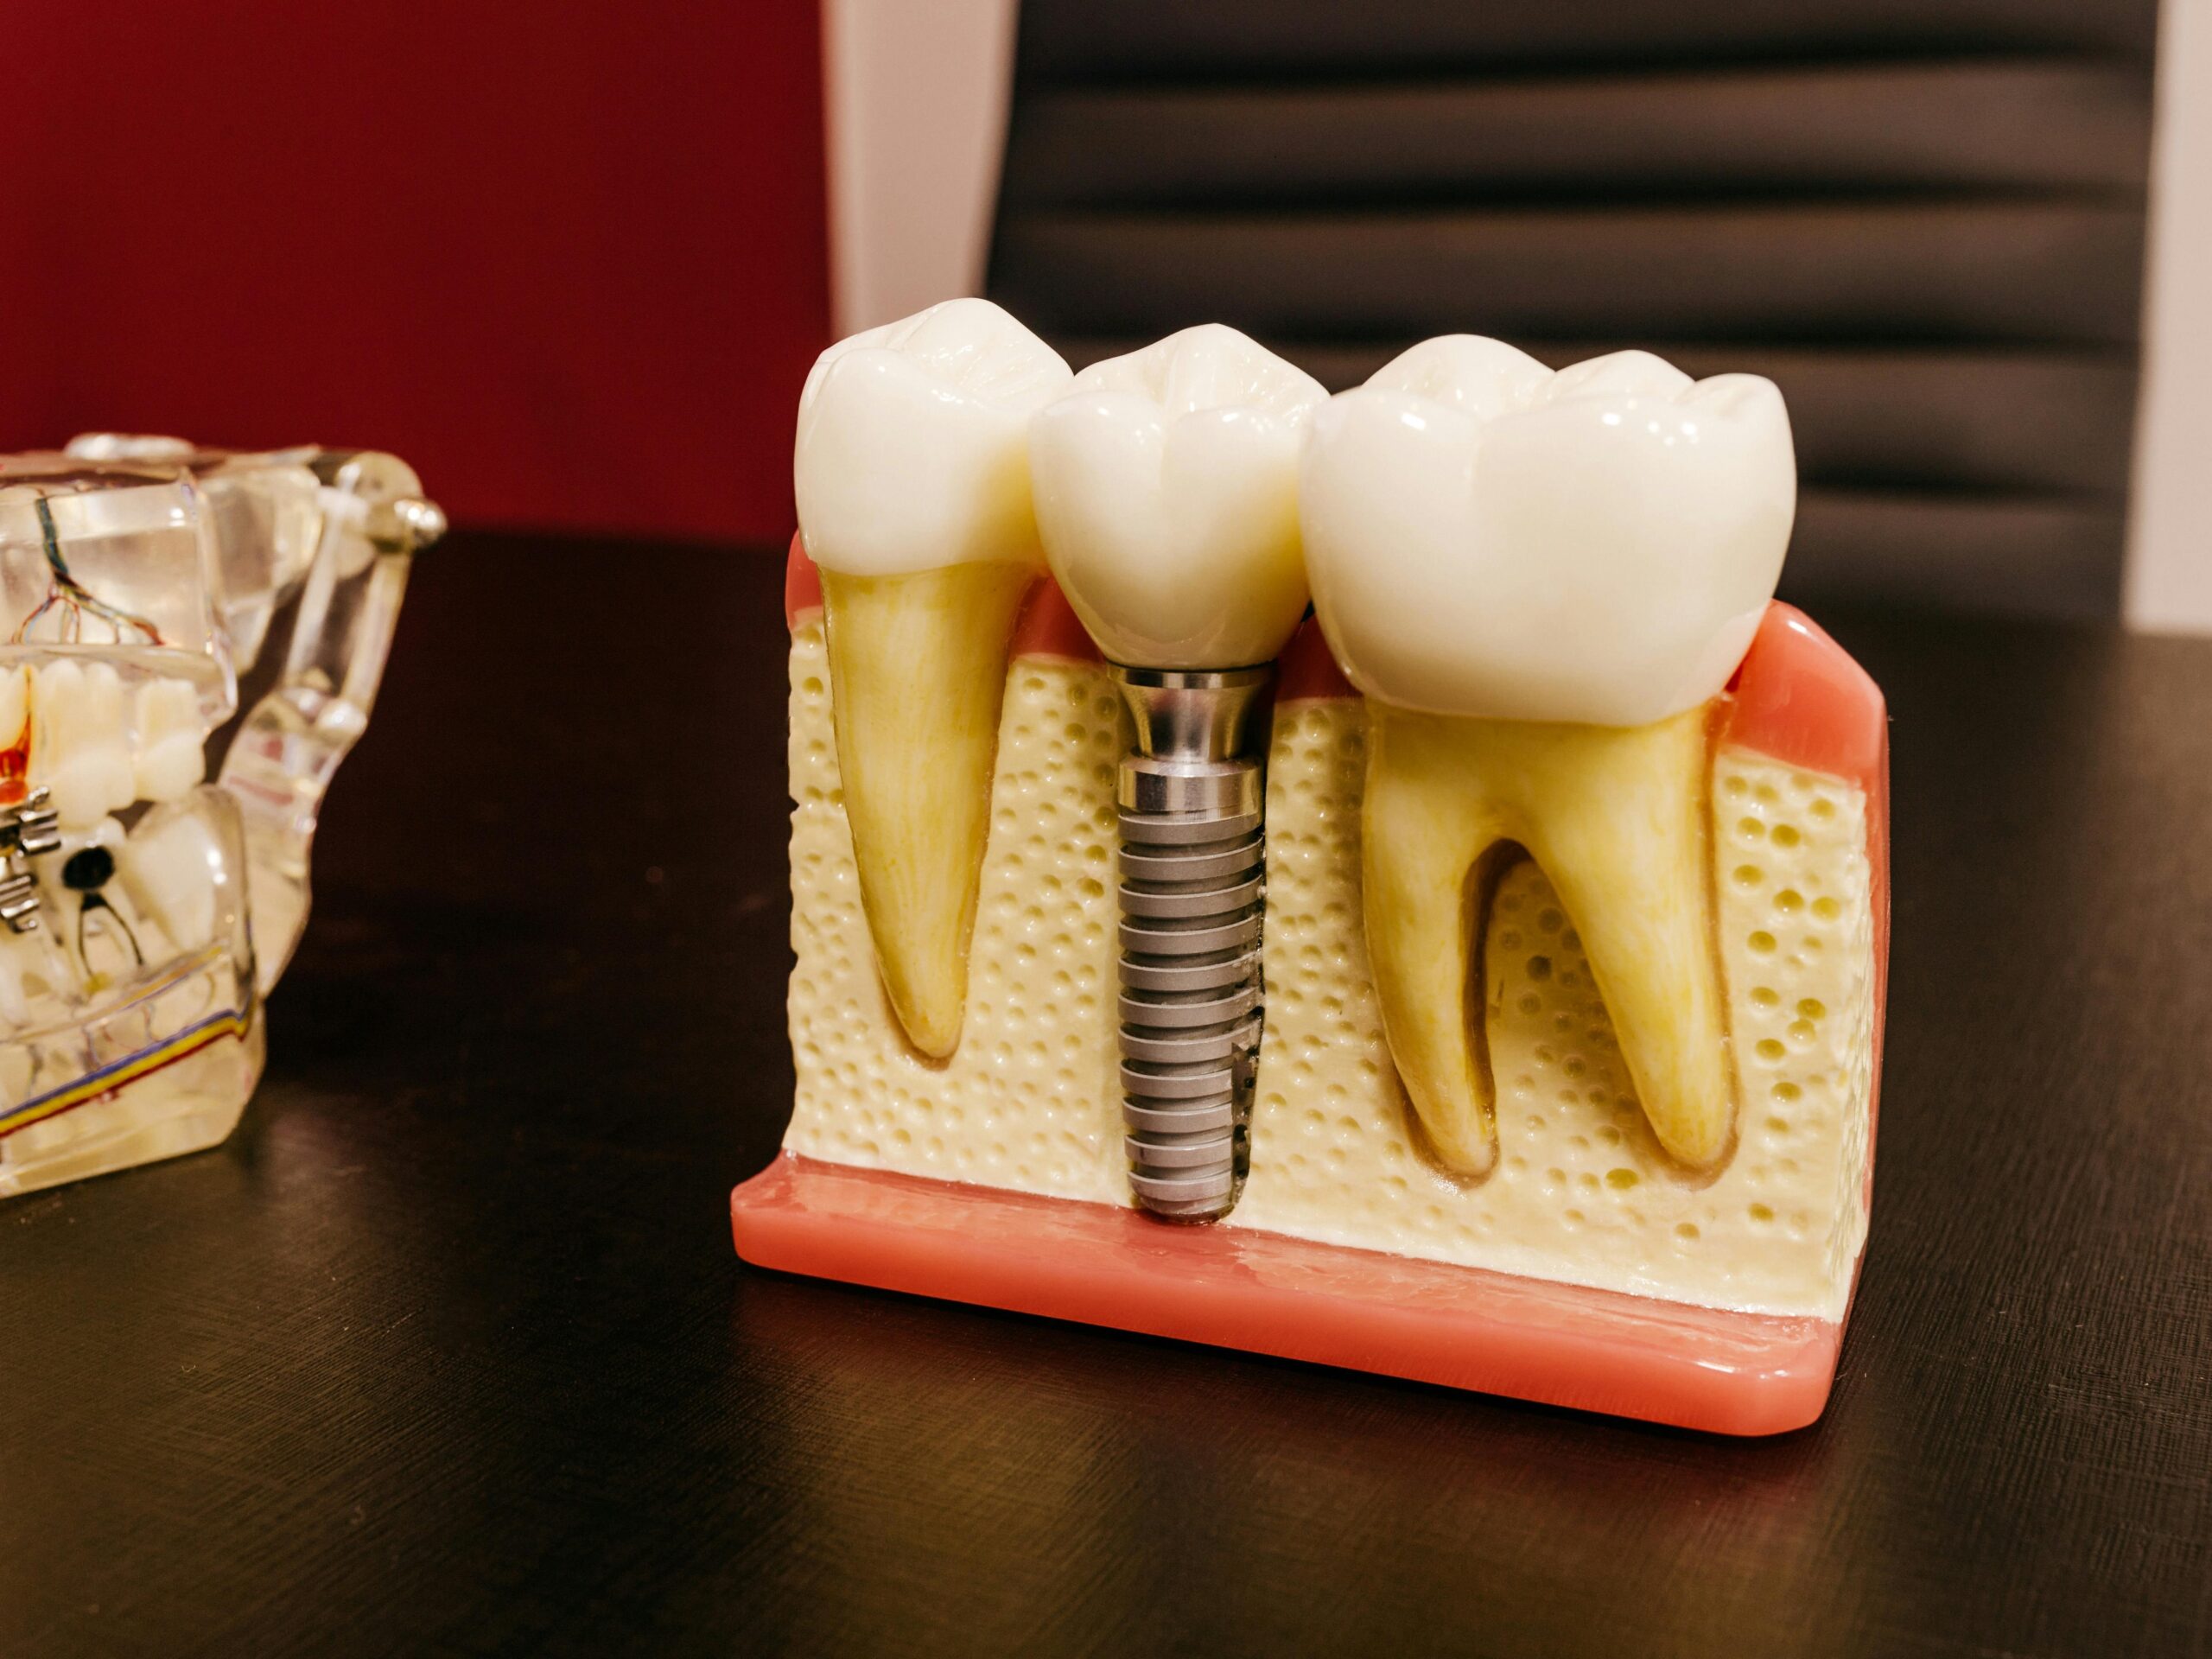 Close-up view of a dental implant model, showcasing the abutment and custom-made prosthetic tooth attached, resembling natural teeth.